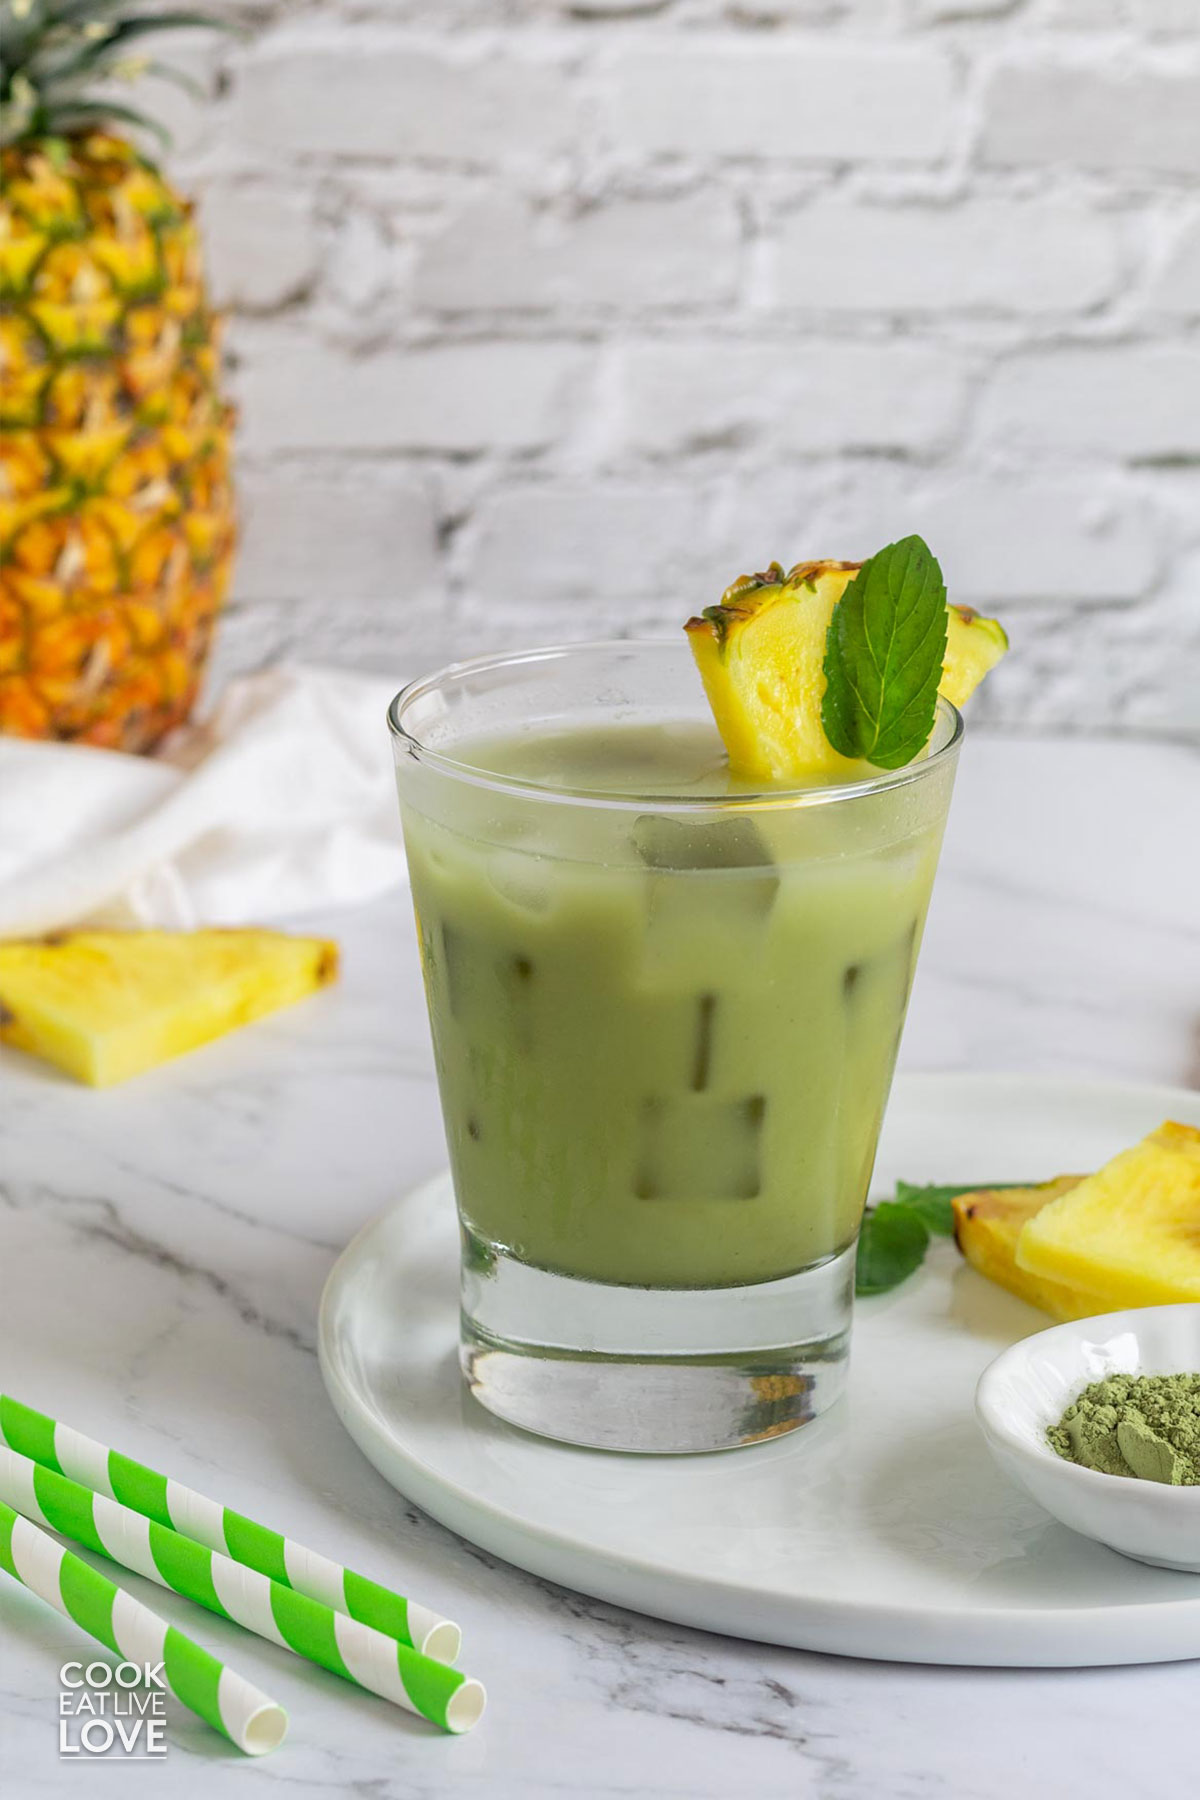 A glass of pineapple matcha drink on the table garnished with fresh mint and pineapple wedge.